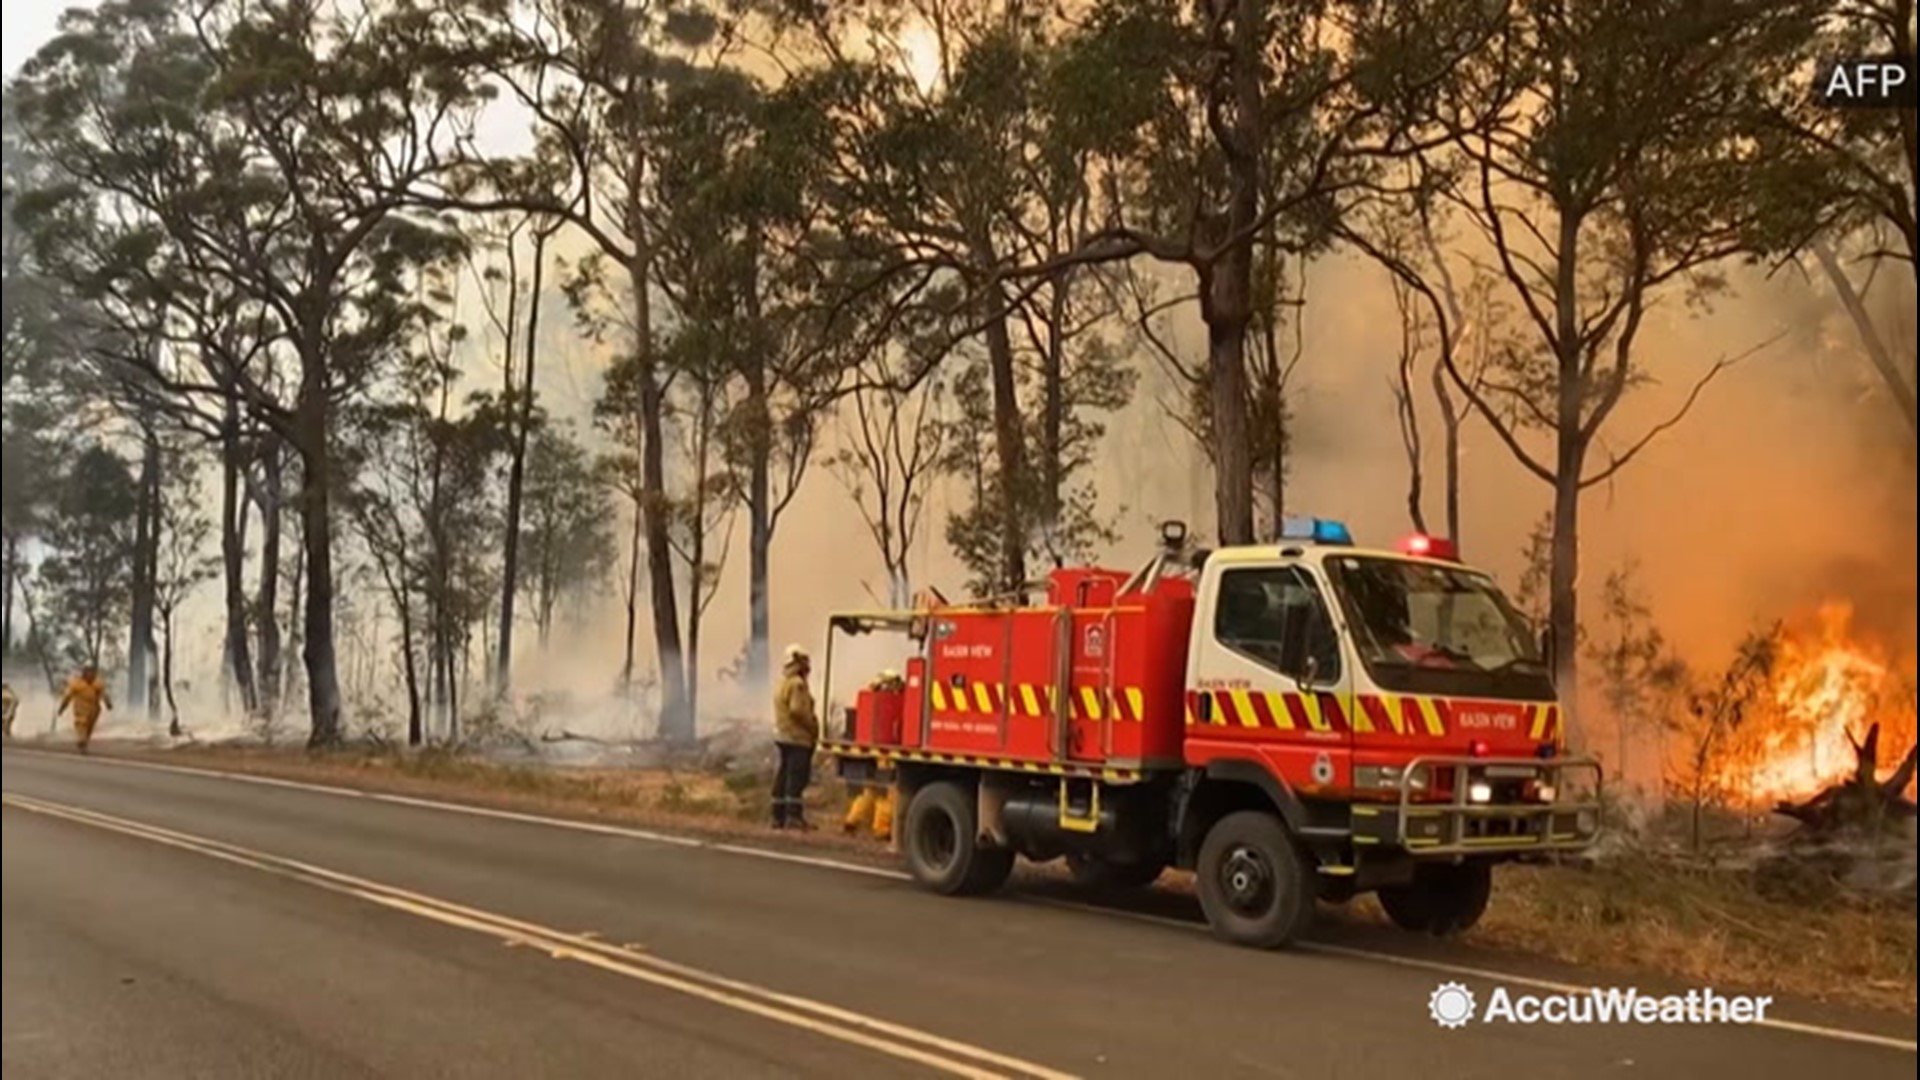 It may have been New Years Day, but firefighters were out in full force in New South Wales, Australia, on Jan. 1 battling wildfires that've been raging for months.